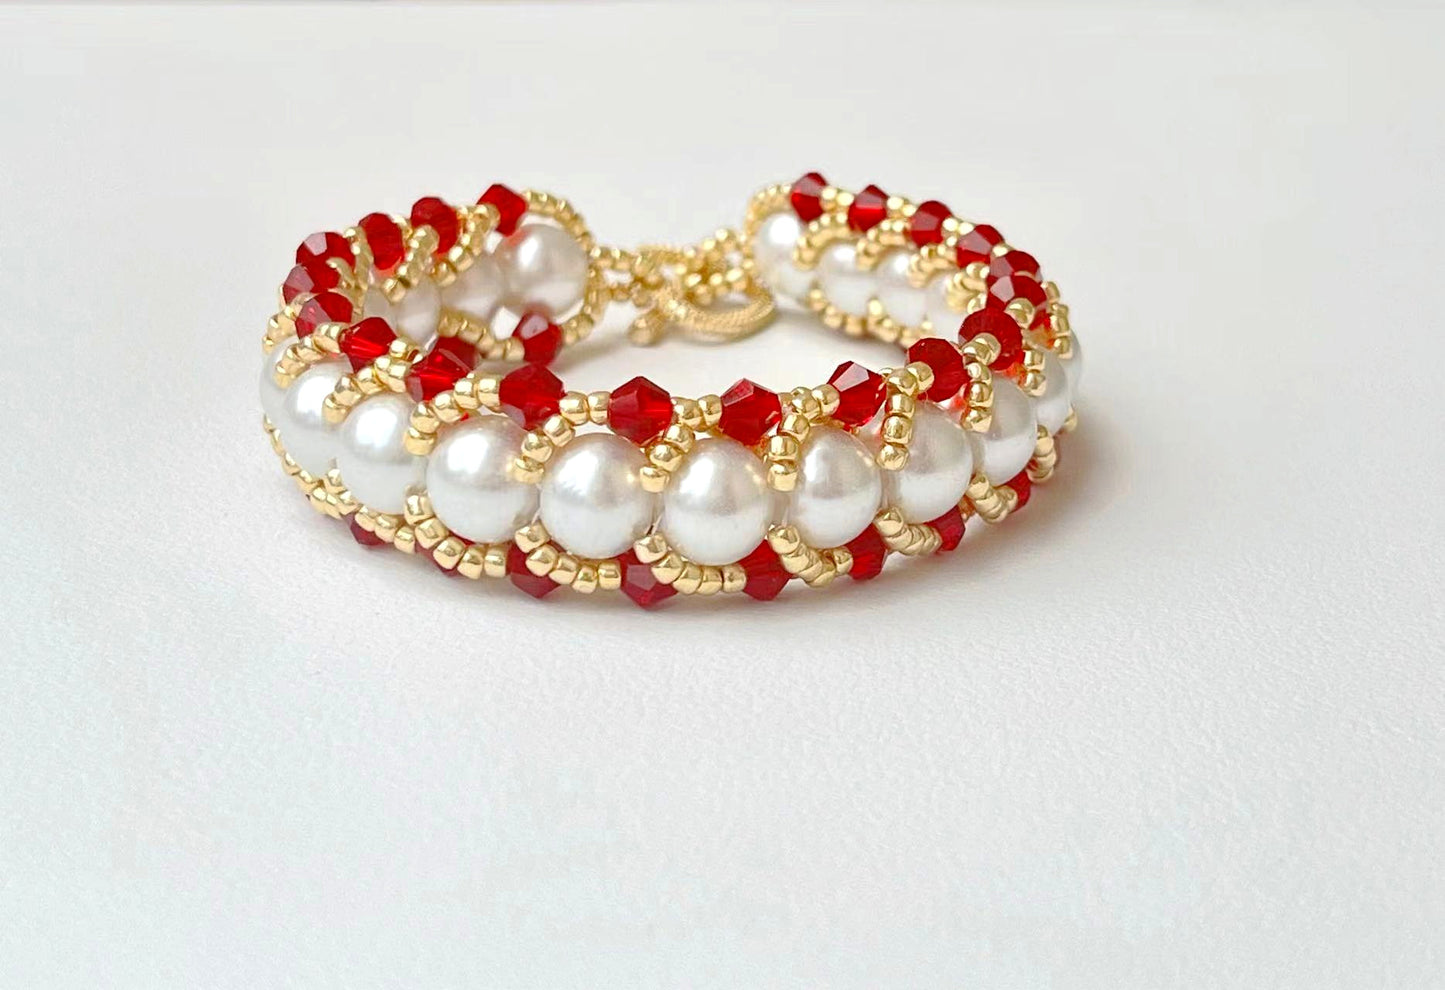 Unique Artisan Crystal Bead Necklaces with Red and White Beads